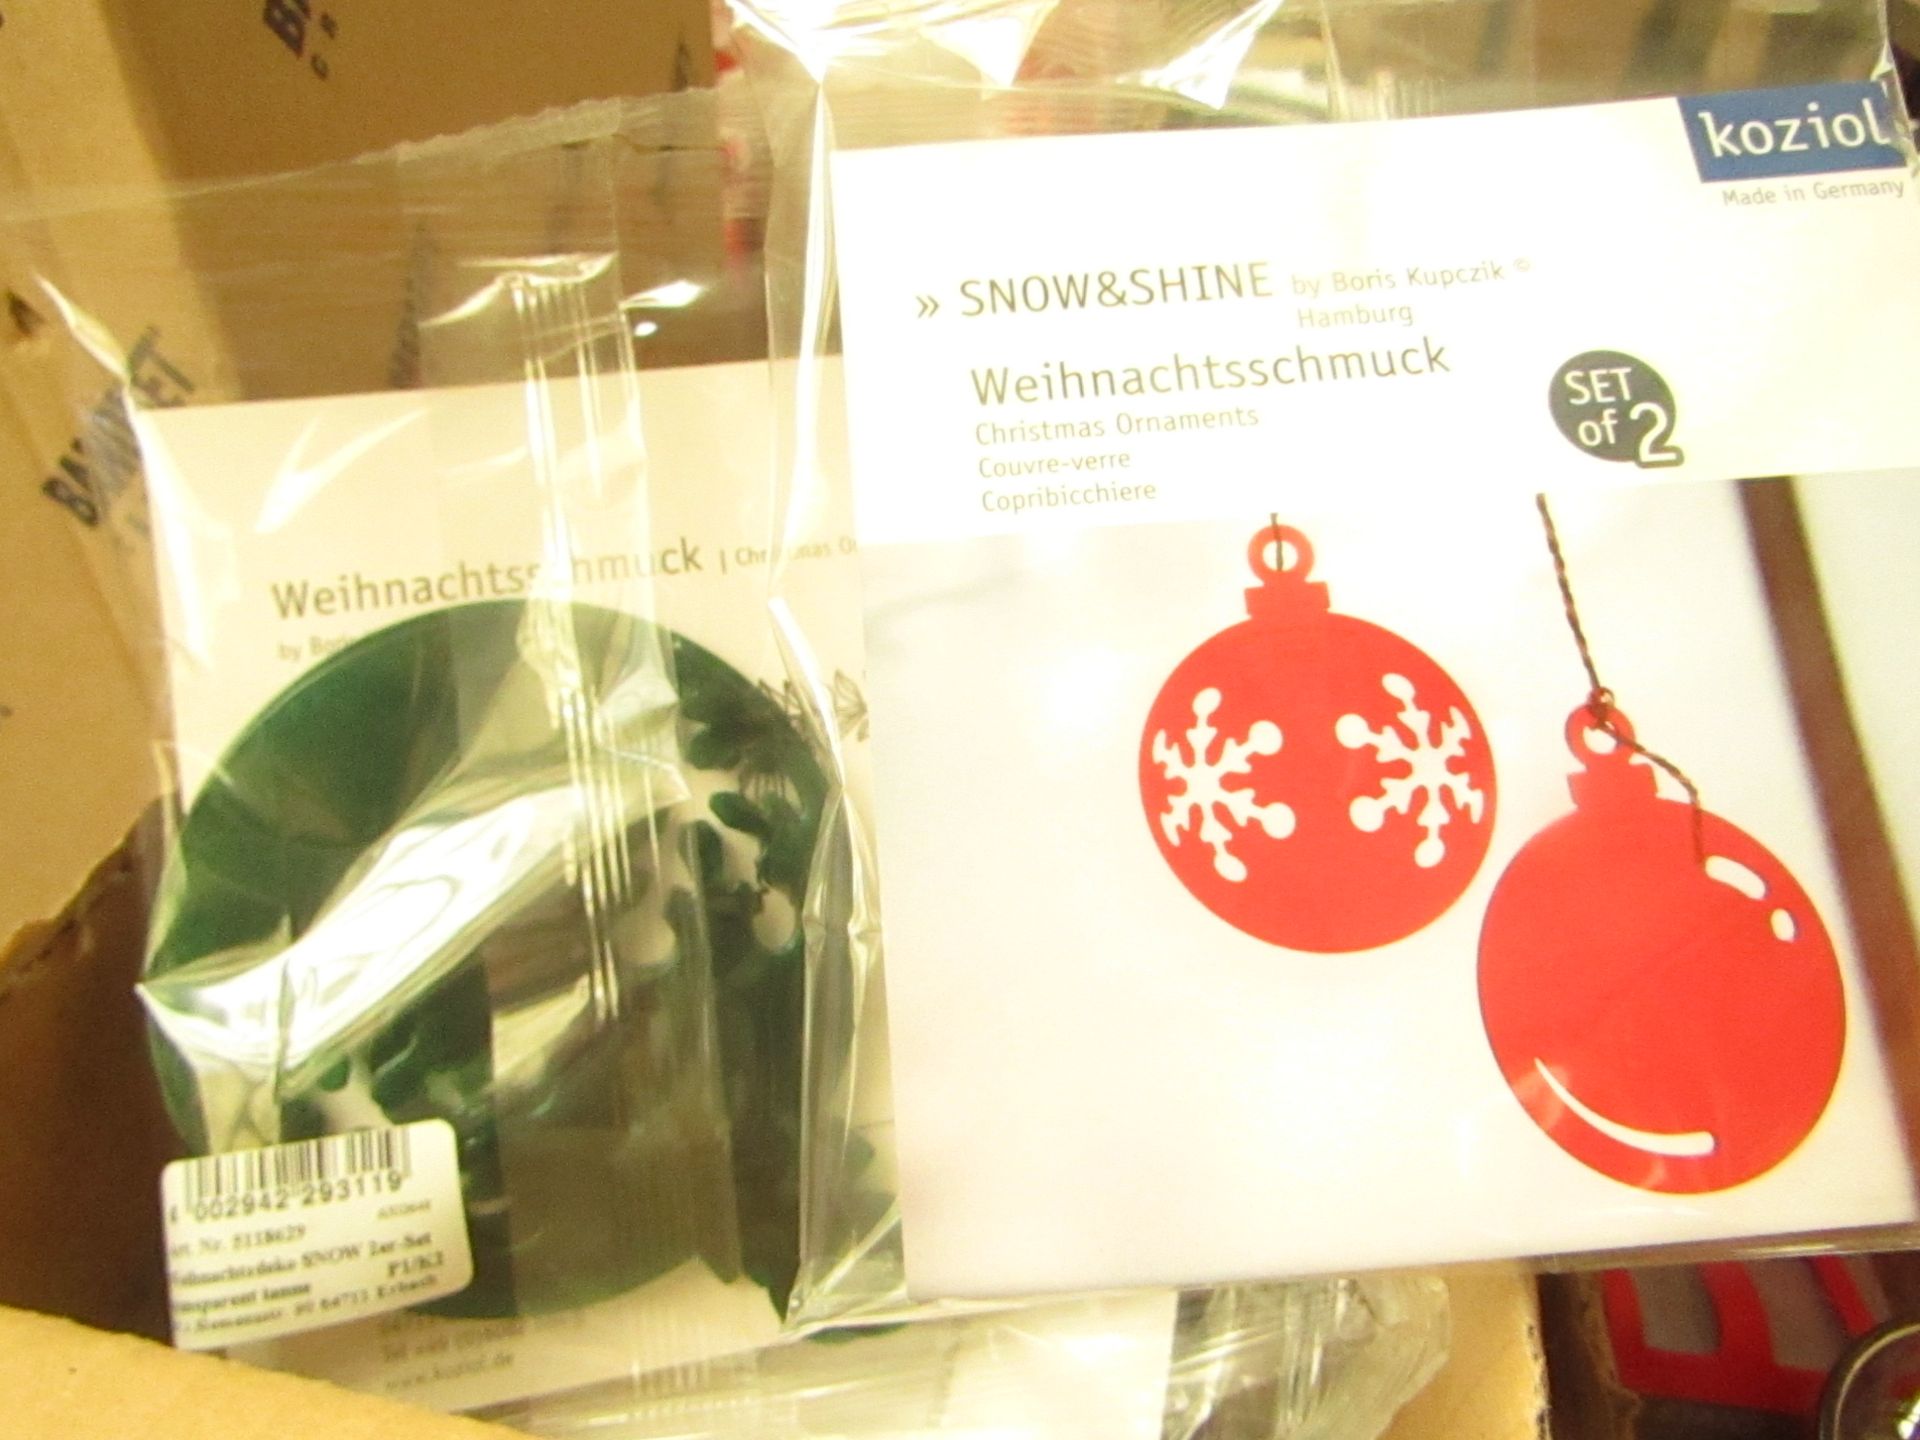 22 Packs of 2 Christmas Ornaments. New & Packaged